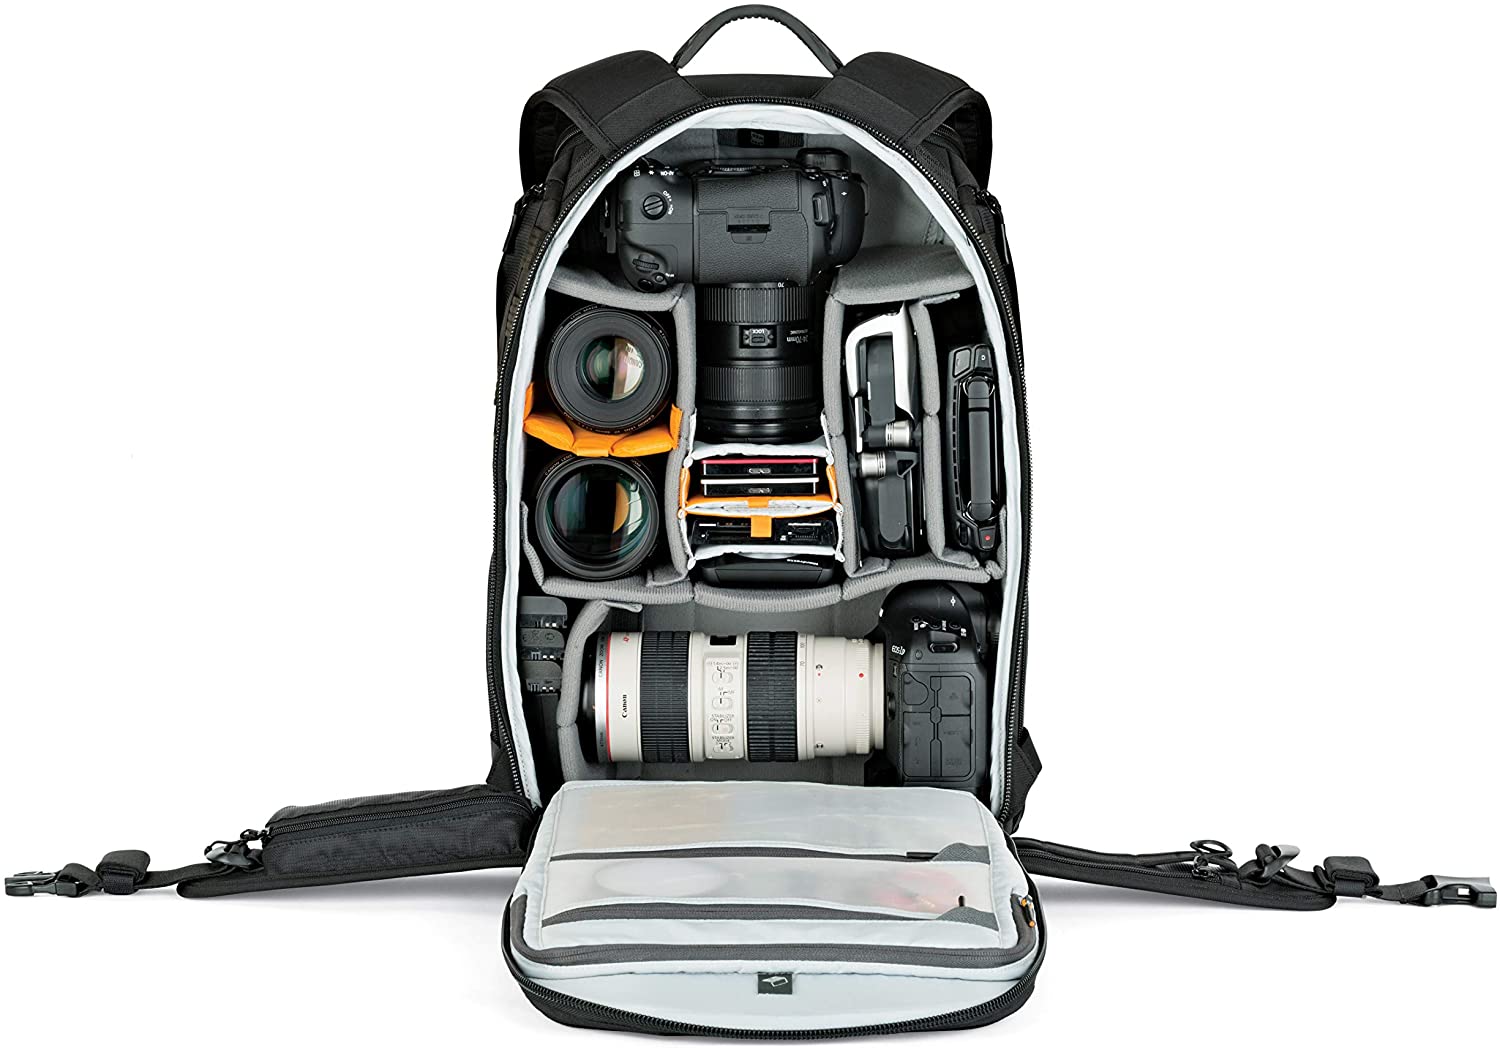 Lowepro Pro Tactic 450 AW II- One of the best video camera bags for outdoors image 